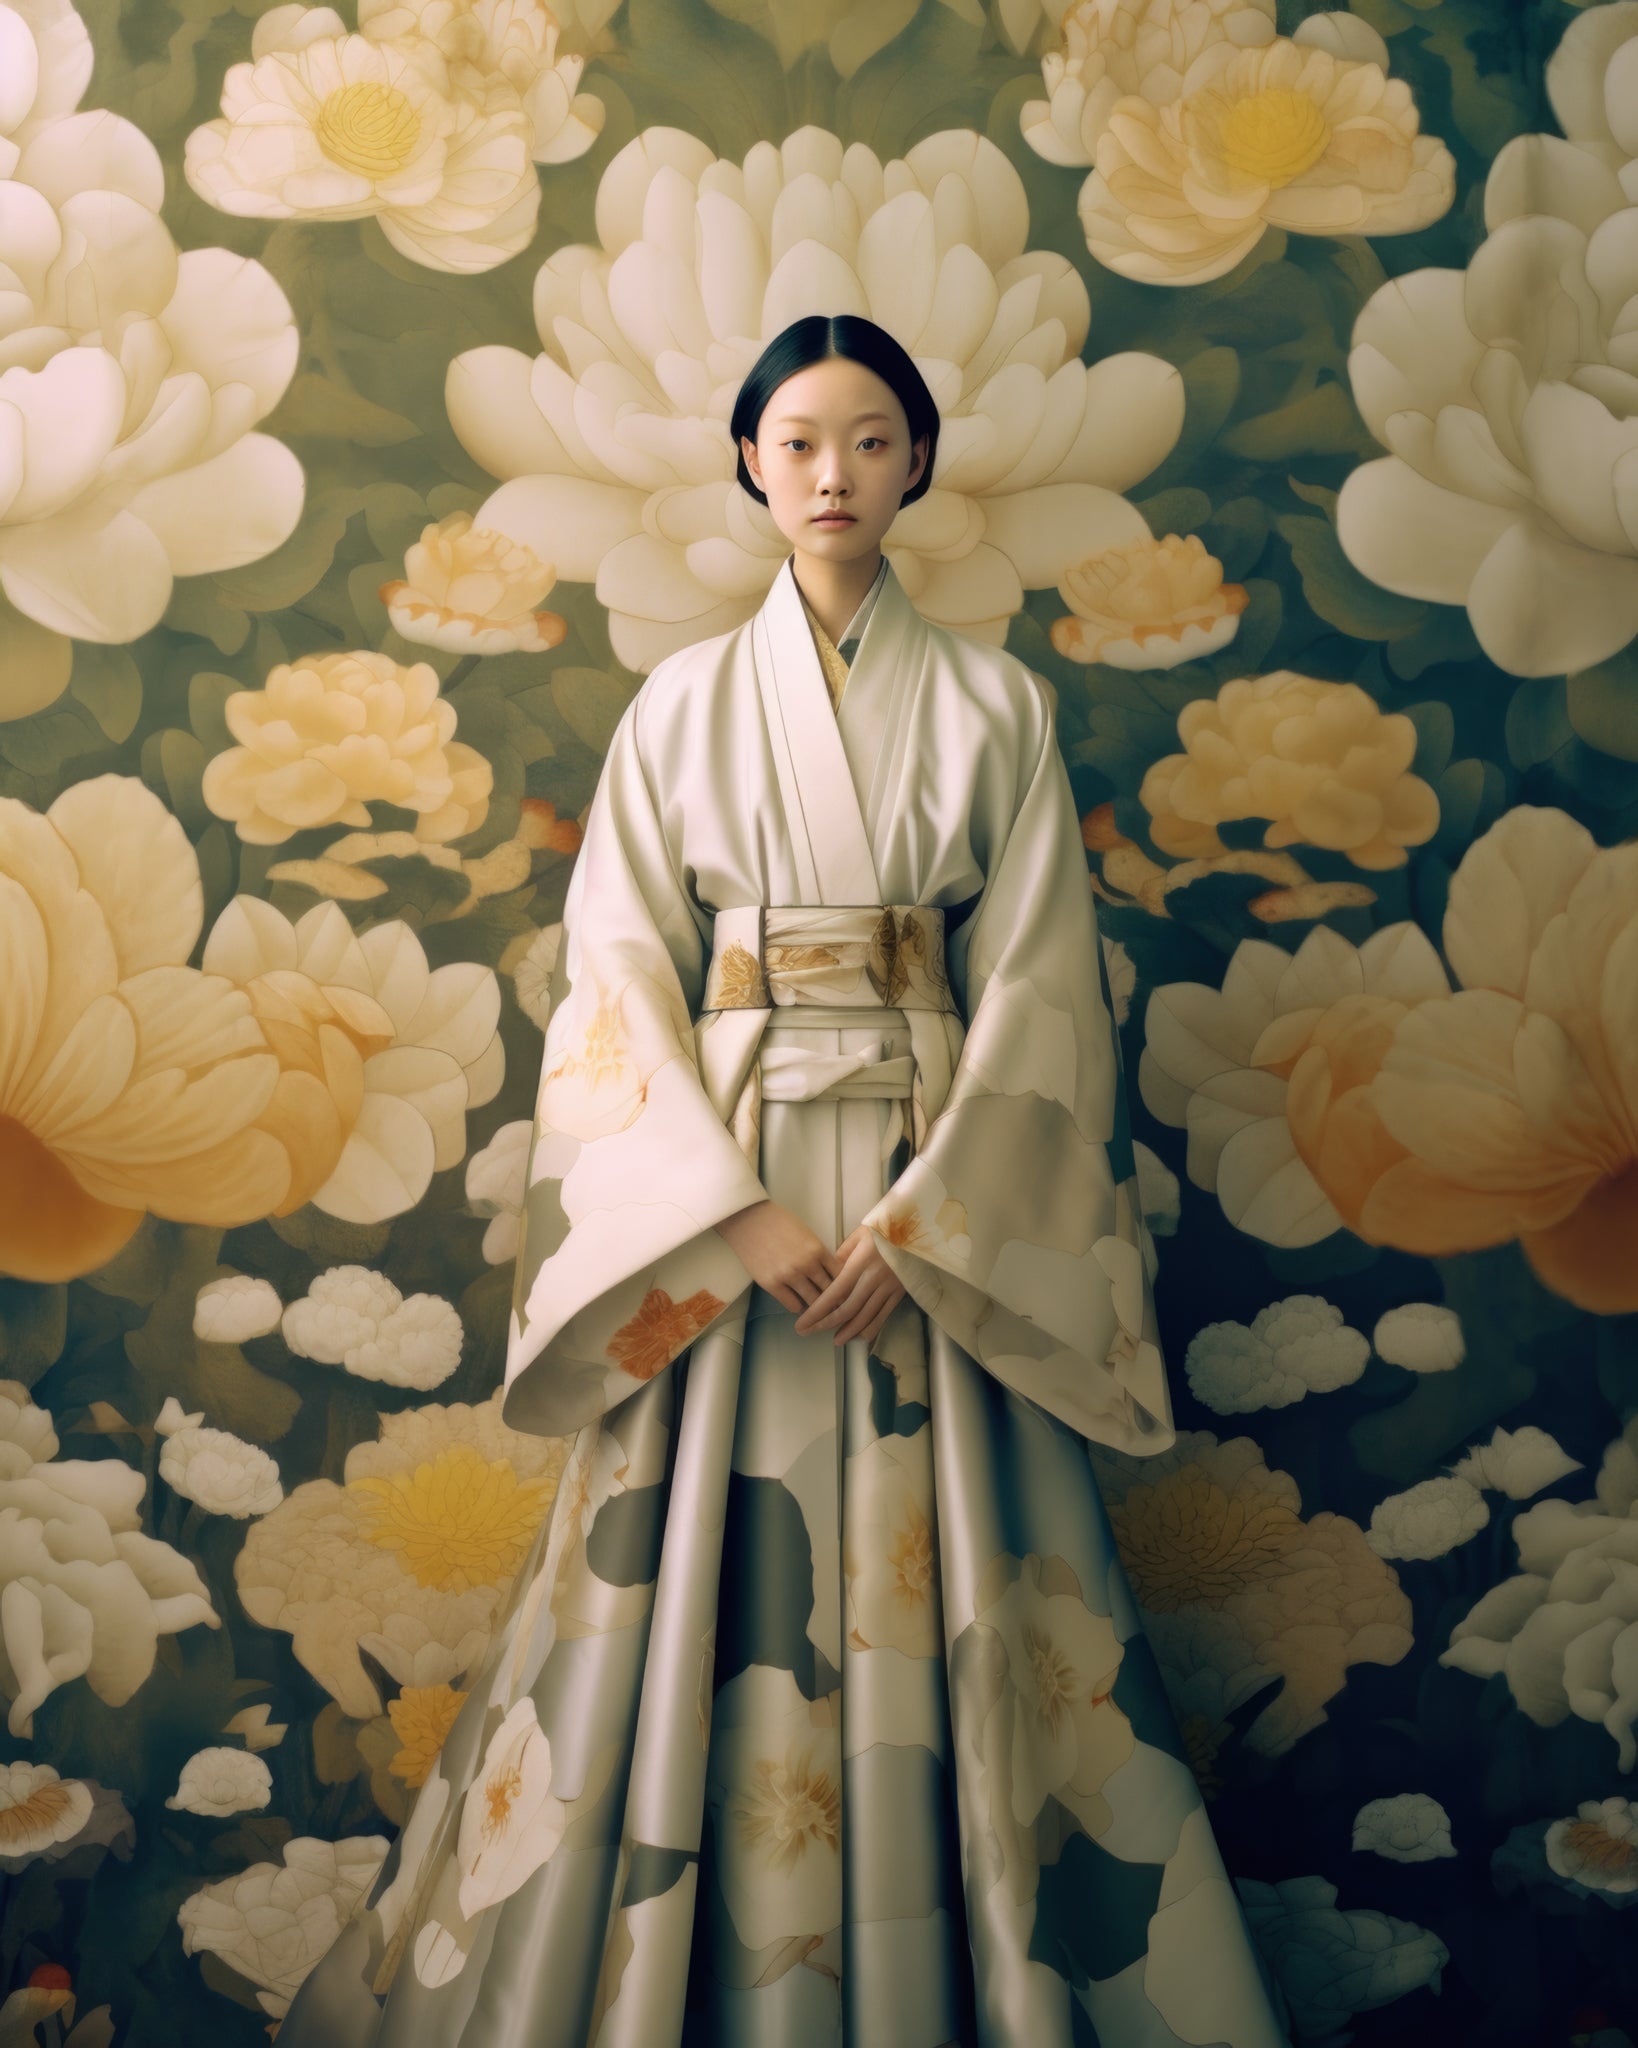 Fine art print featuring a woman dressed in a traditional kimono with delicate floral patterns, set against a background of soft, blooming flowers. This art print is a stunning example of an artwork print.